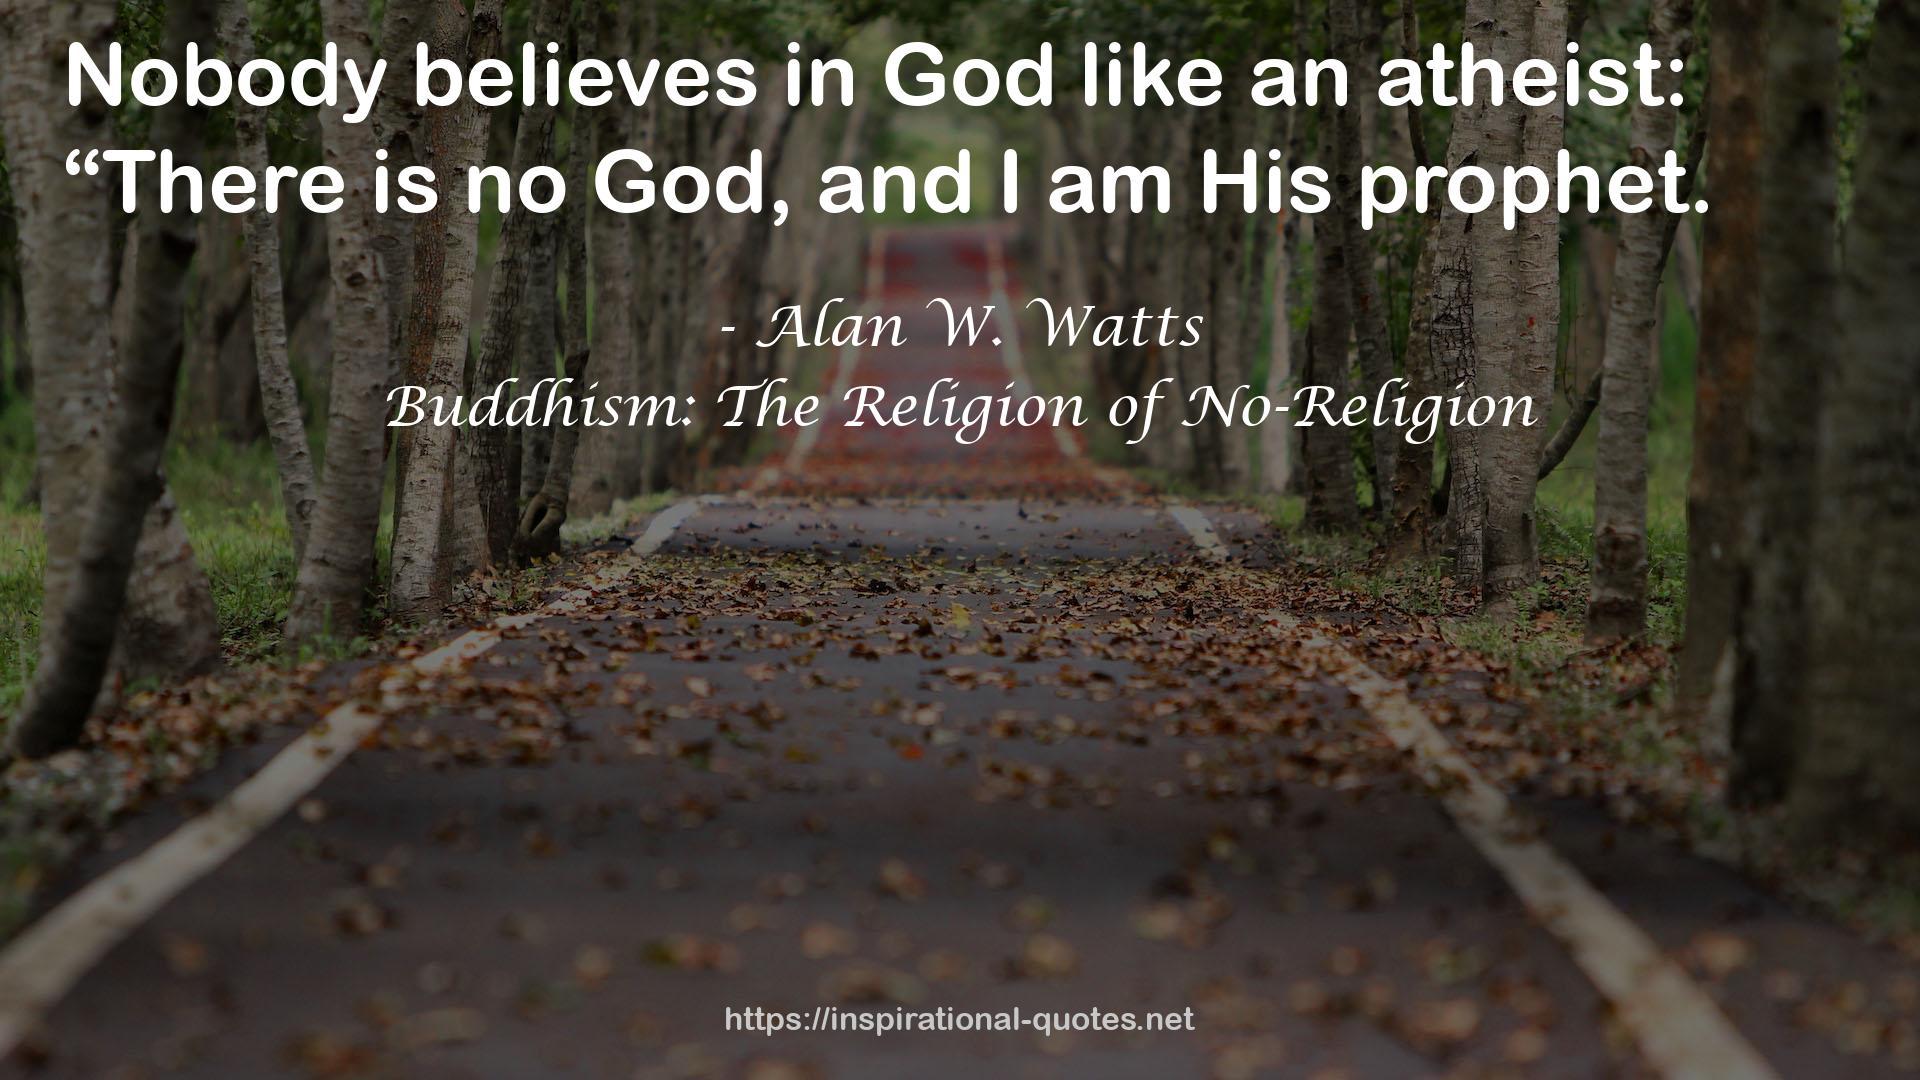 Buddhism: The Religion of No-Religion QUOTES